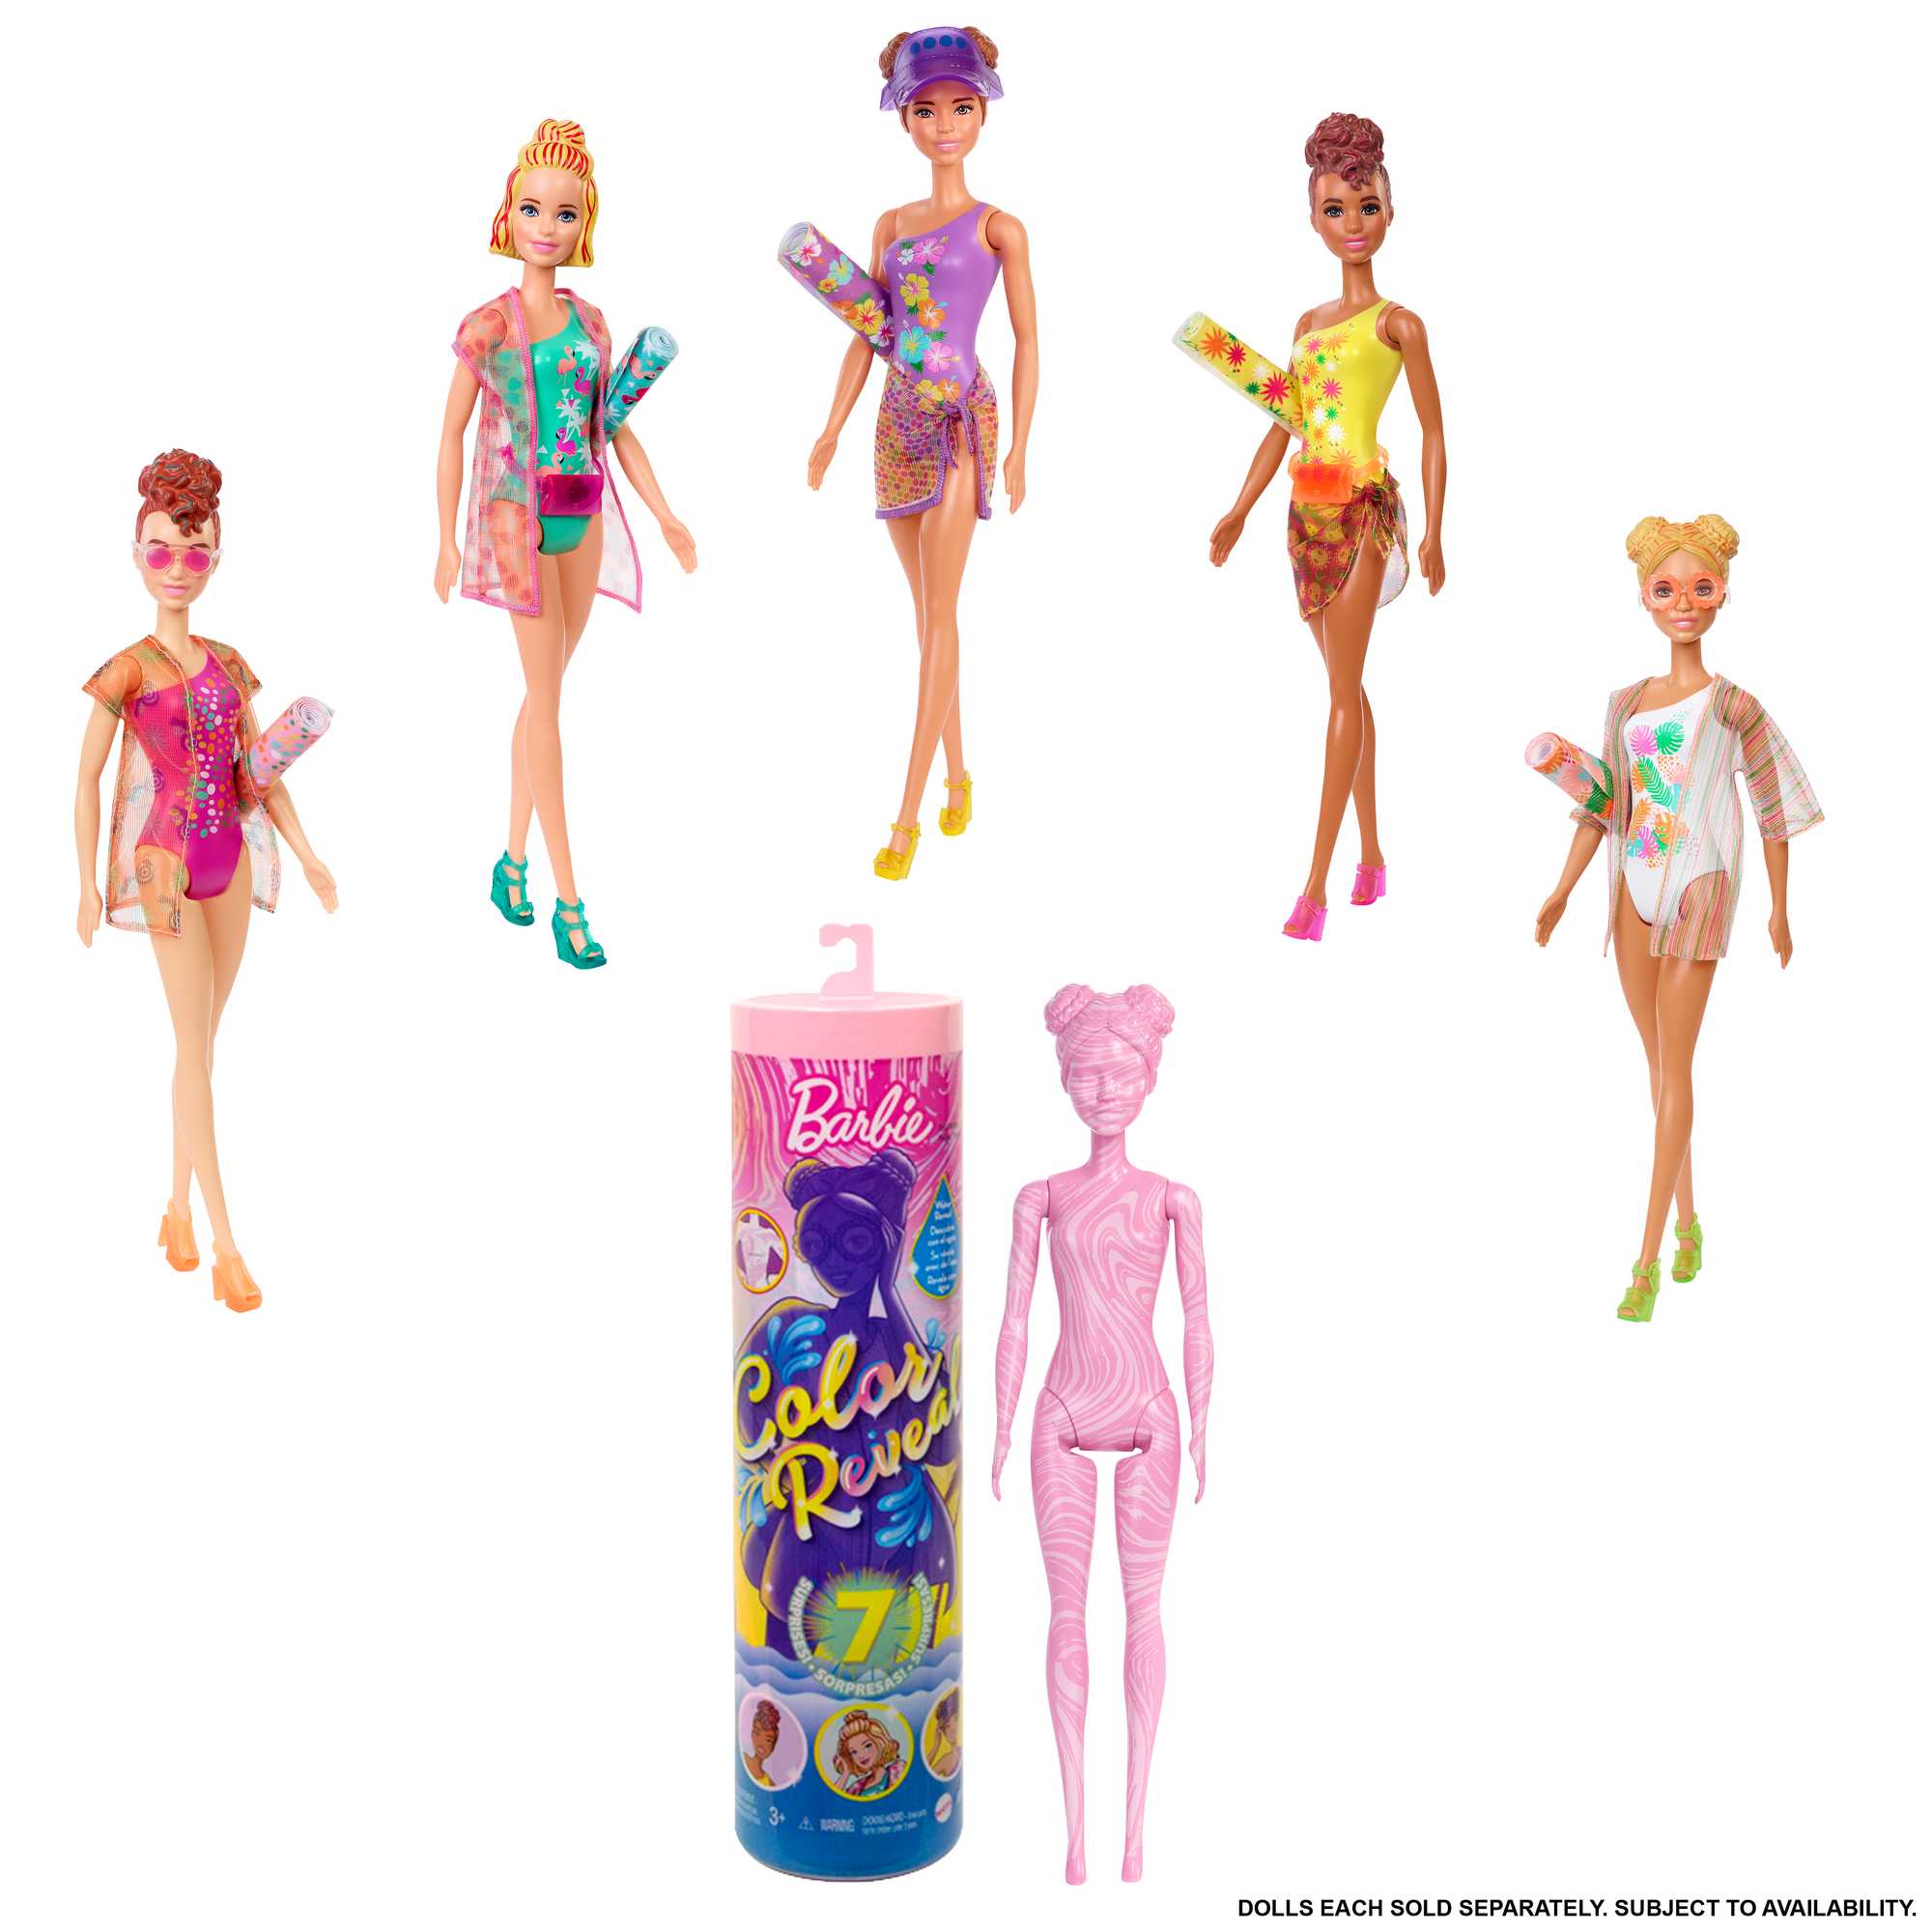  Barbie Accessory Pack, 4 Pieces, with Barbecue Accessories, for  3 to 7 Year Olds : Toys & Games